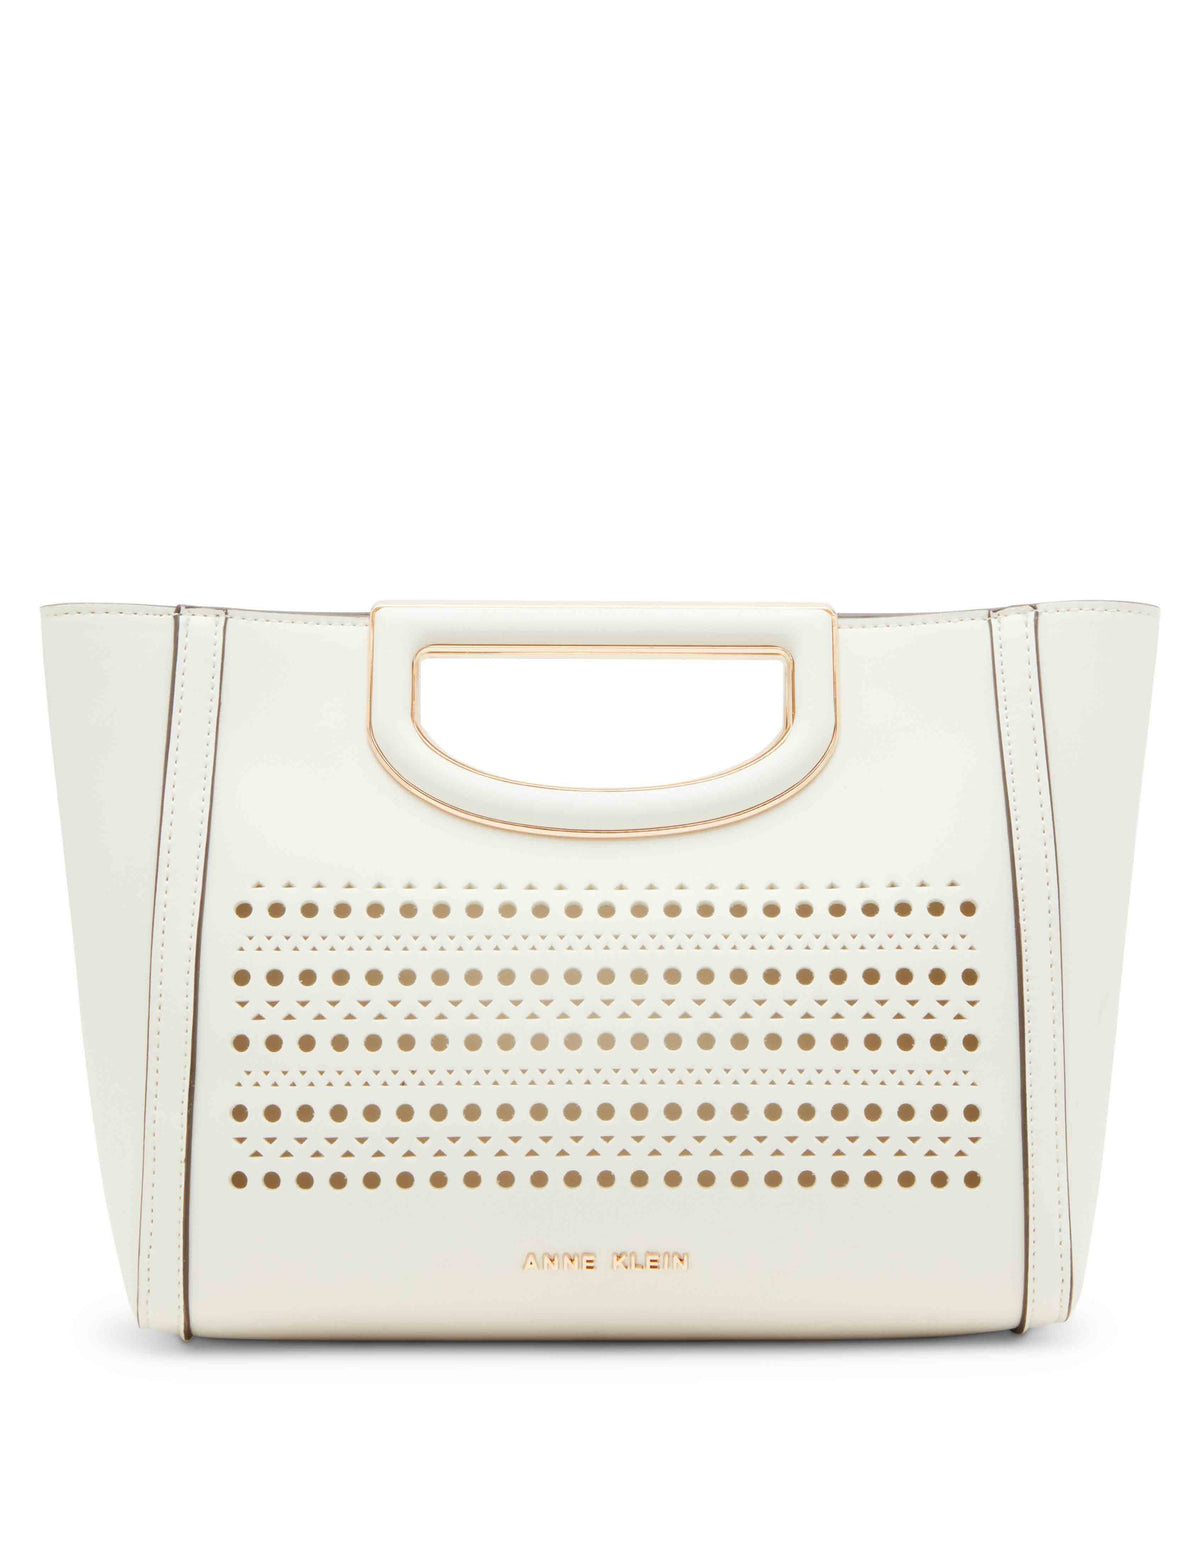 Anne Klein Anne White Perforated Cut Out Handle Satchel